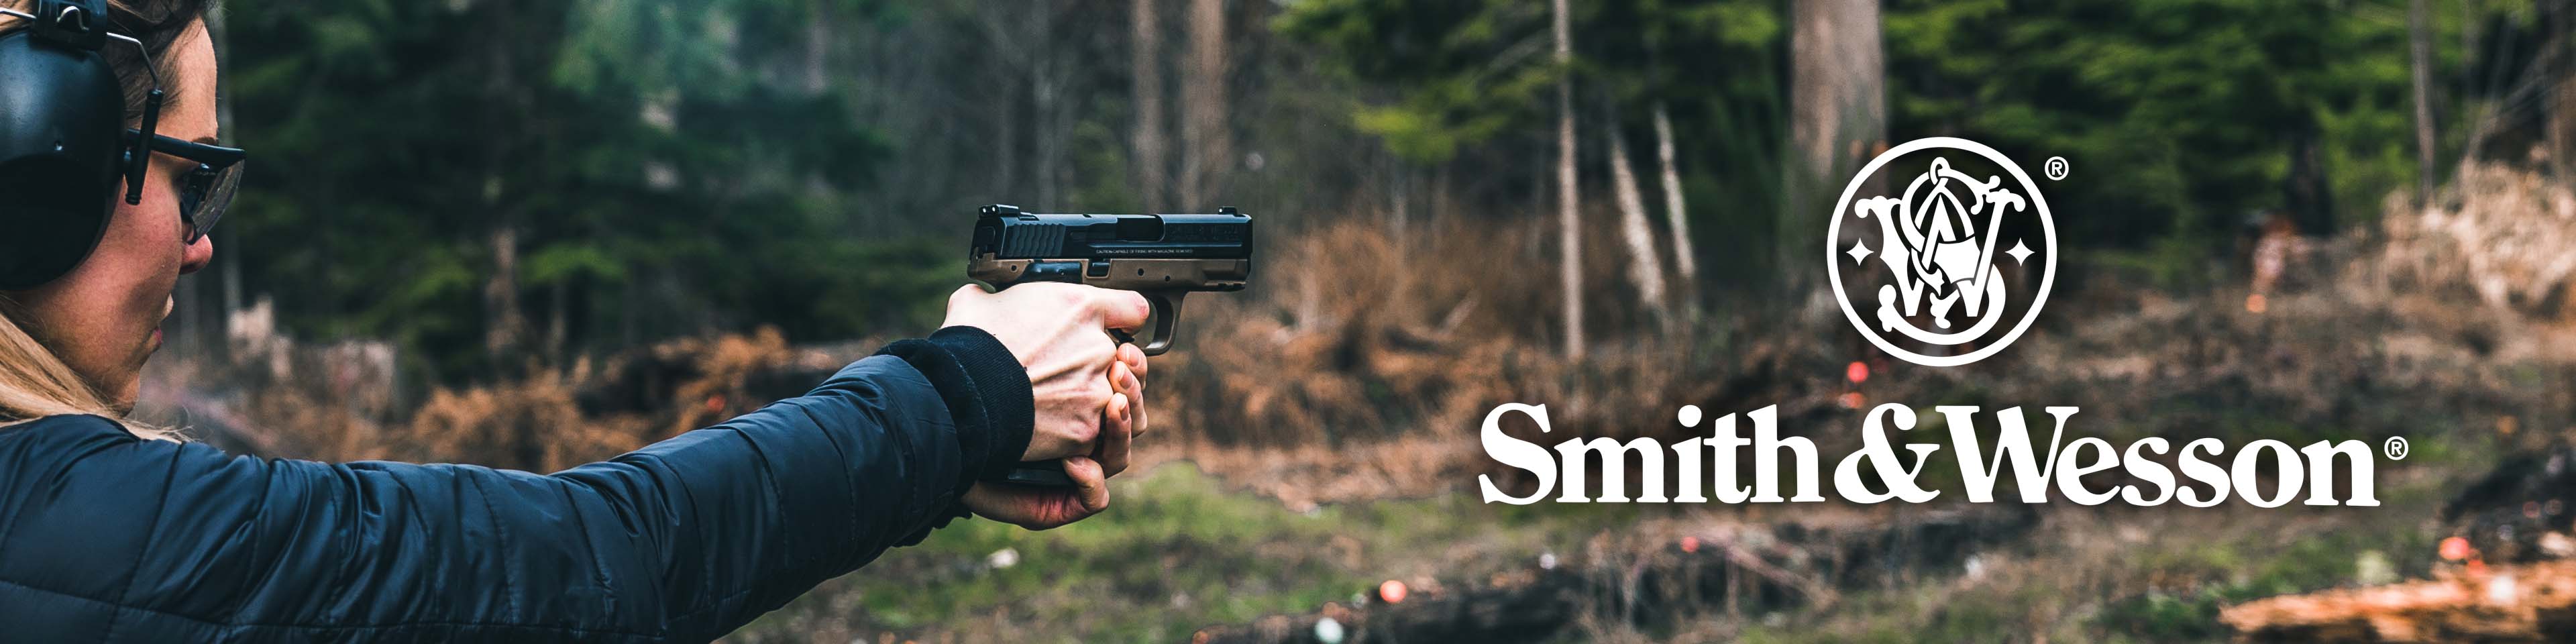 /brands/smith-wesson